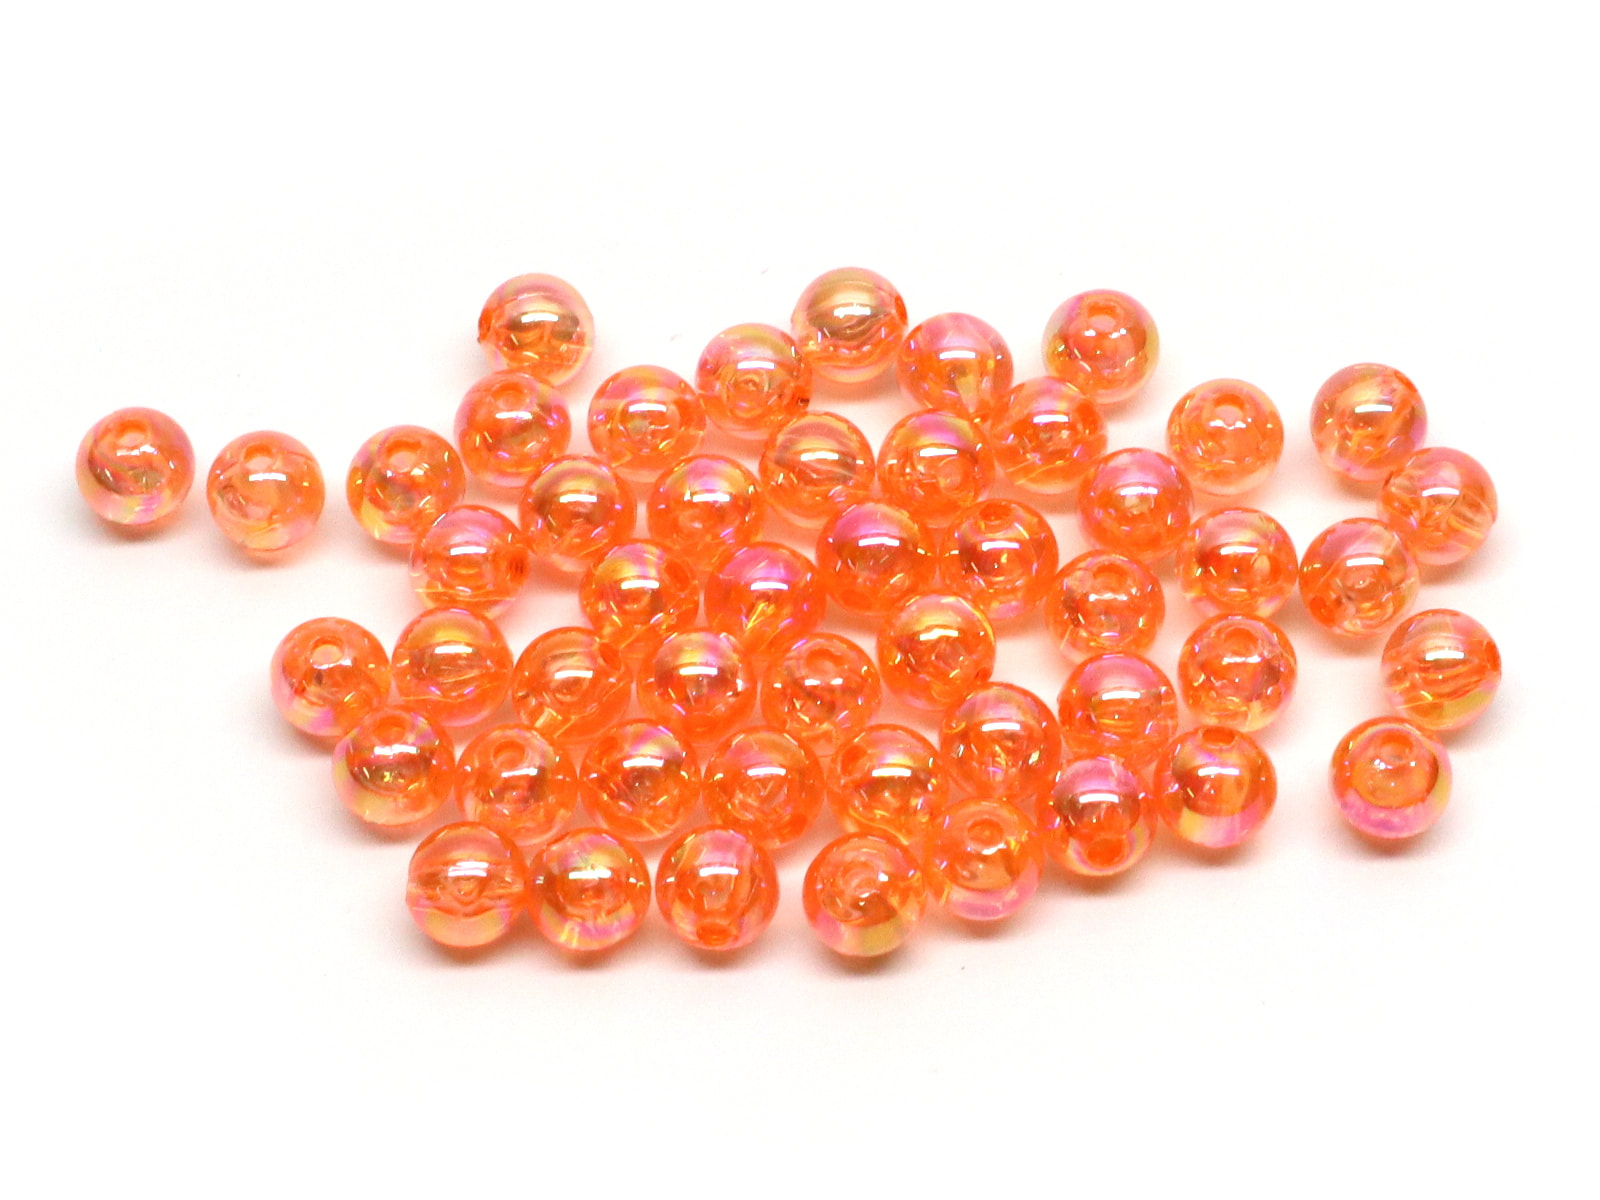 Harmony Fishing - Holographic Beads for Fishing Rigs, Baits & Lures (50  Pack)